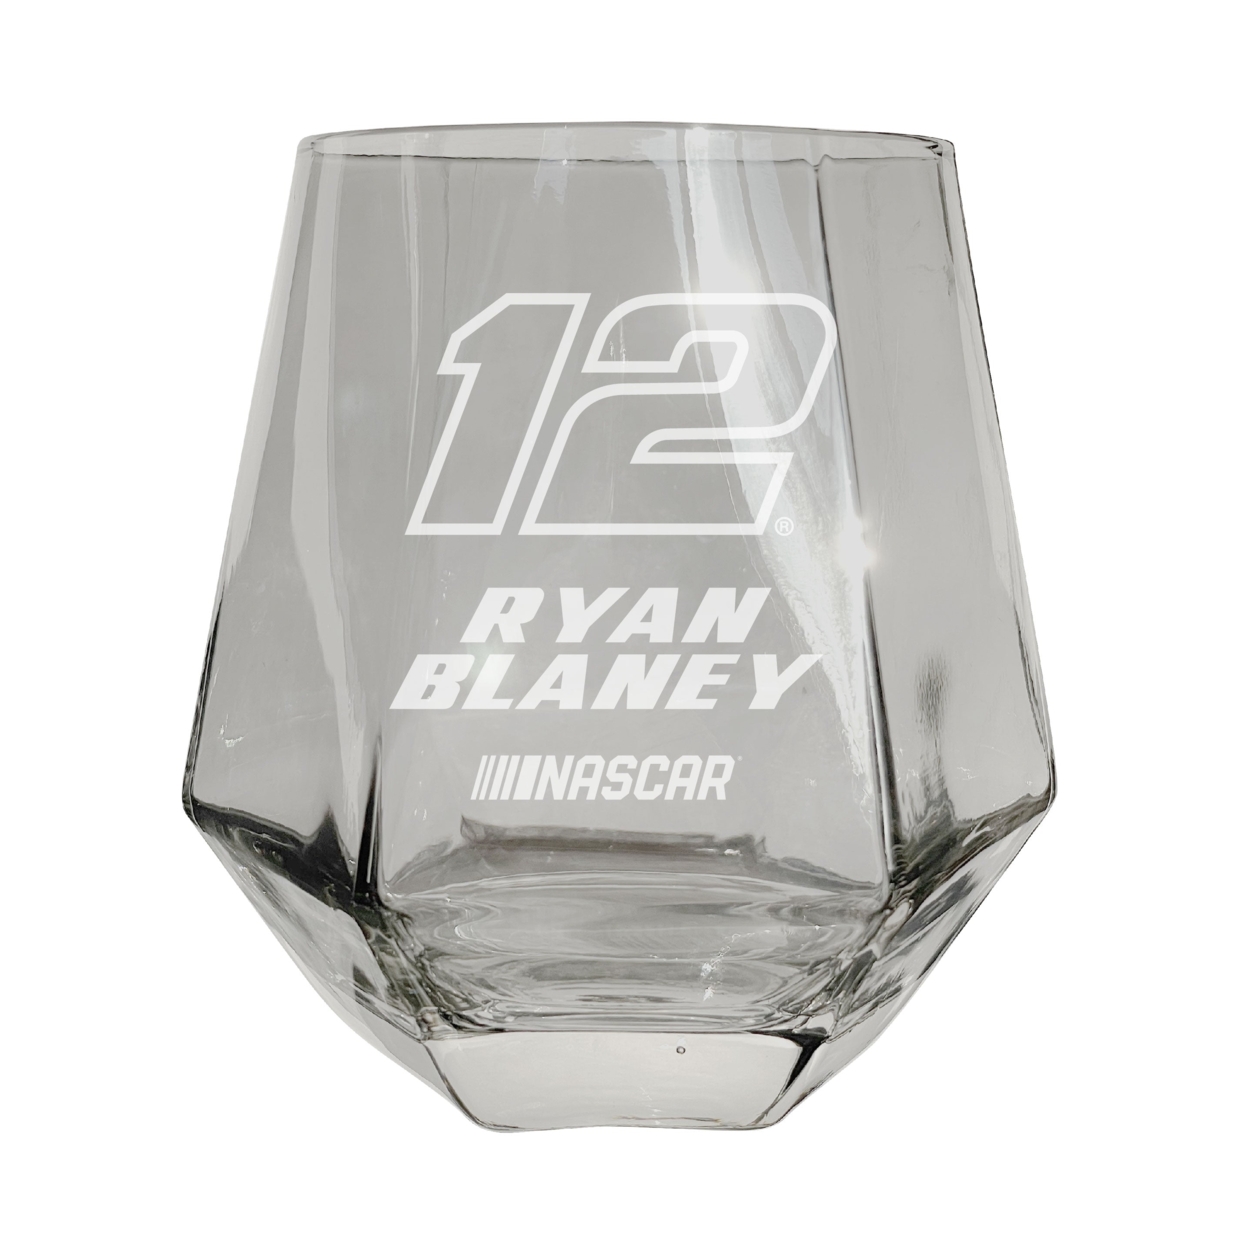 #12 Ryan Blaney Officially Licensed 10 Oz Engraved Diamond Wine Glass - Clear, 2-Pack